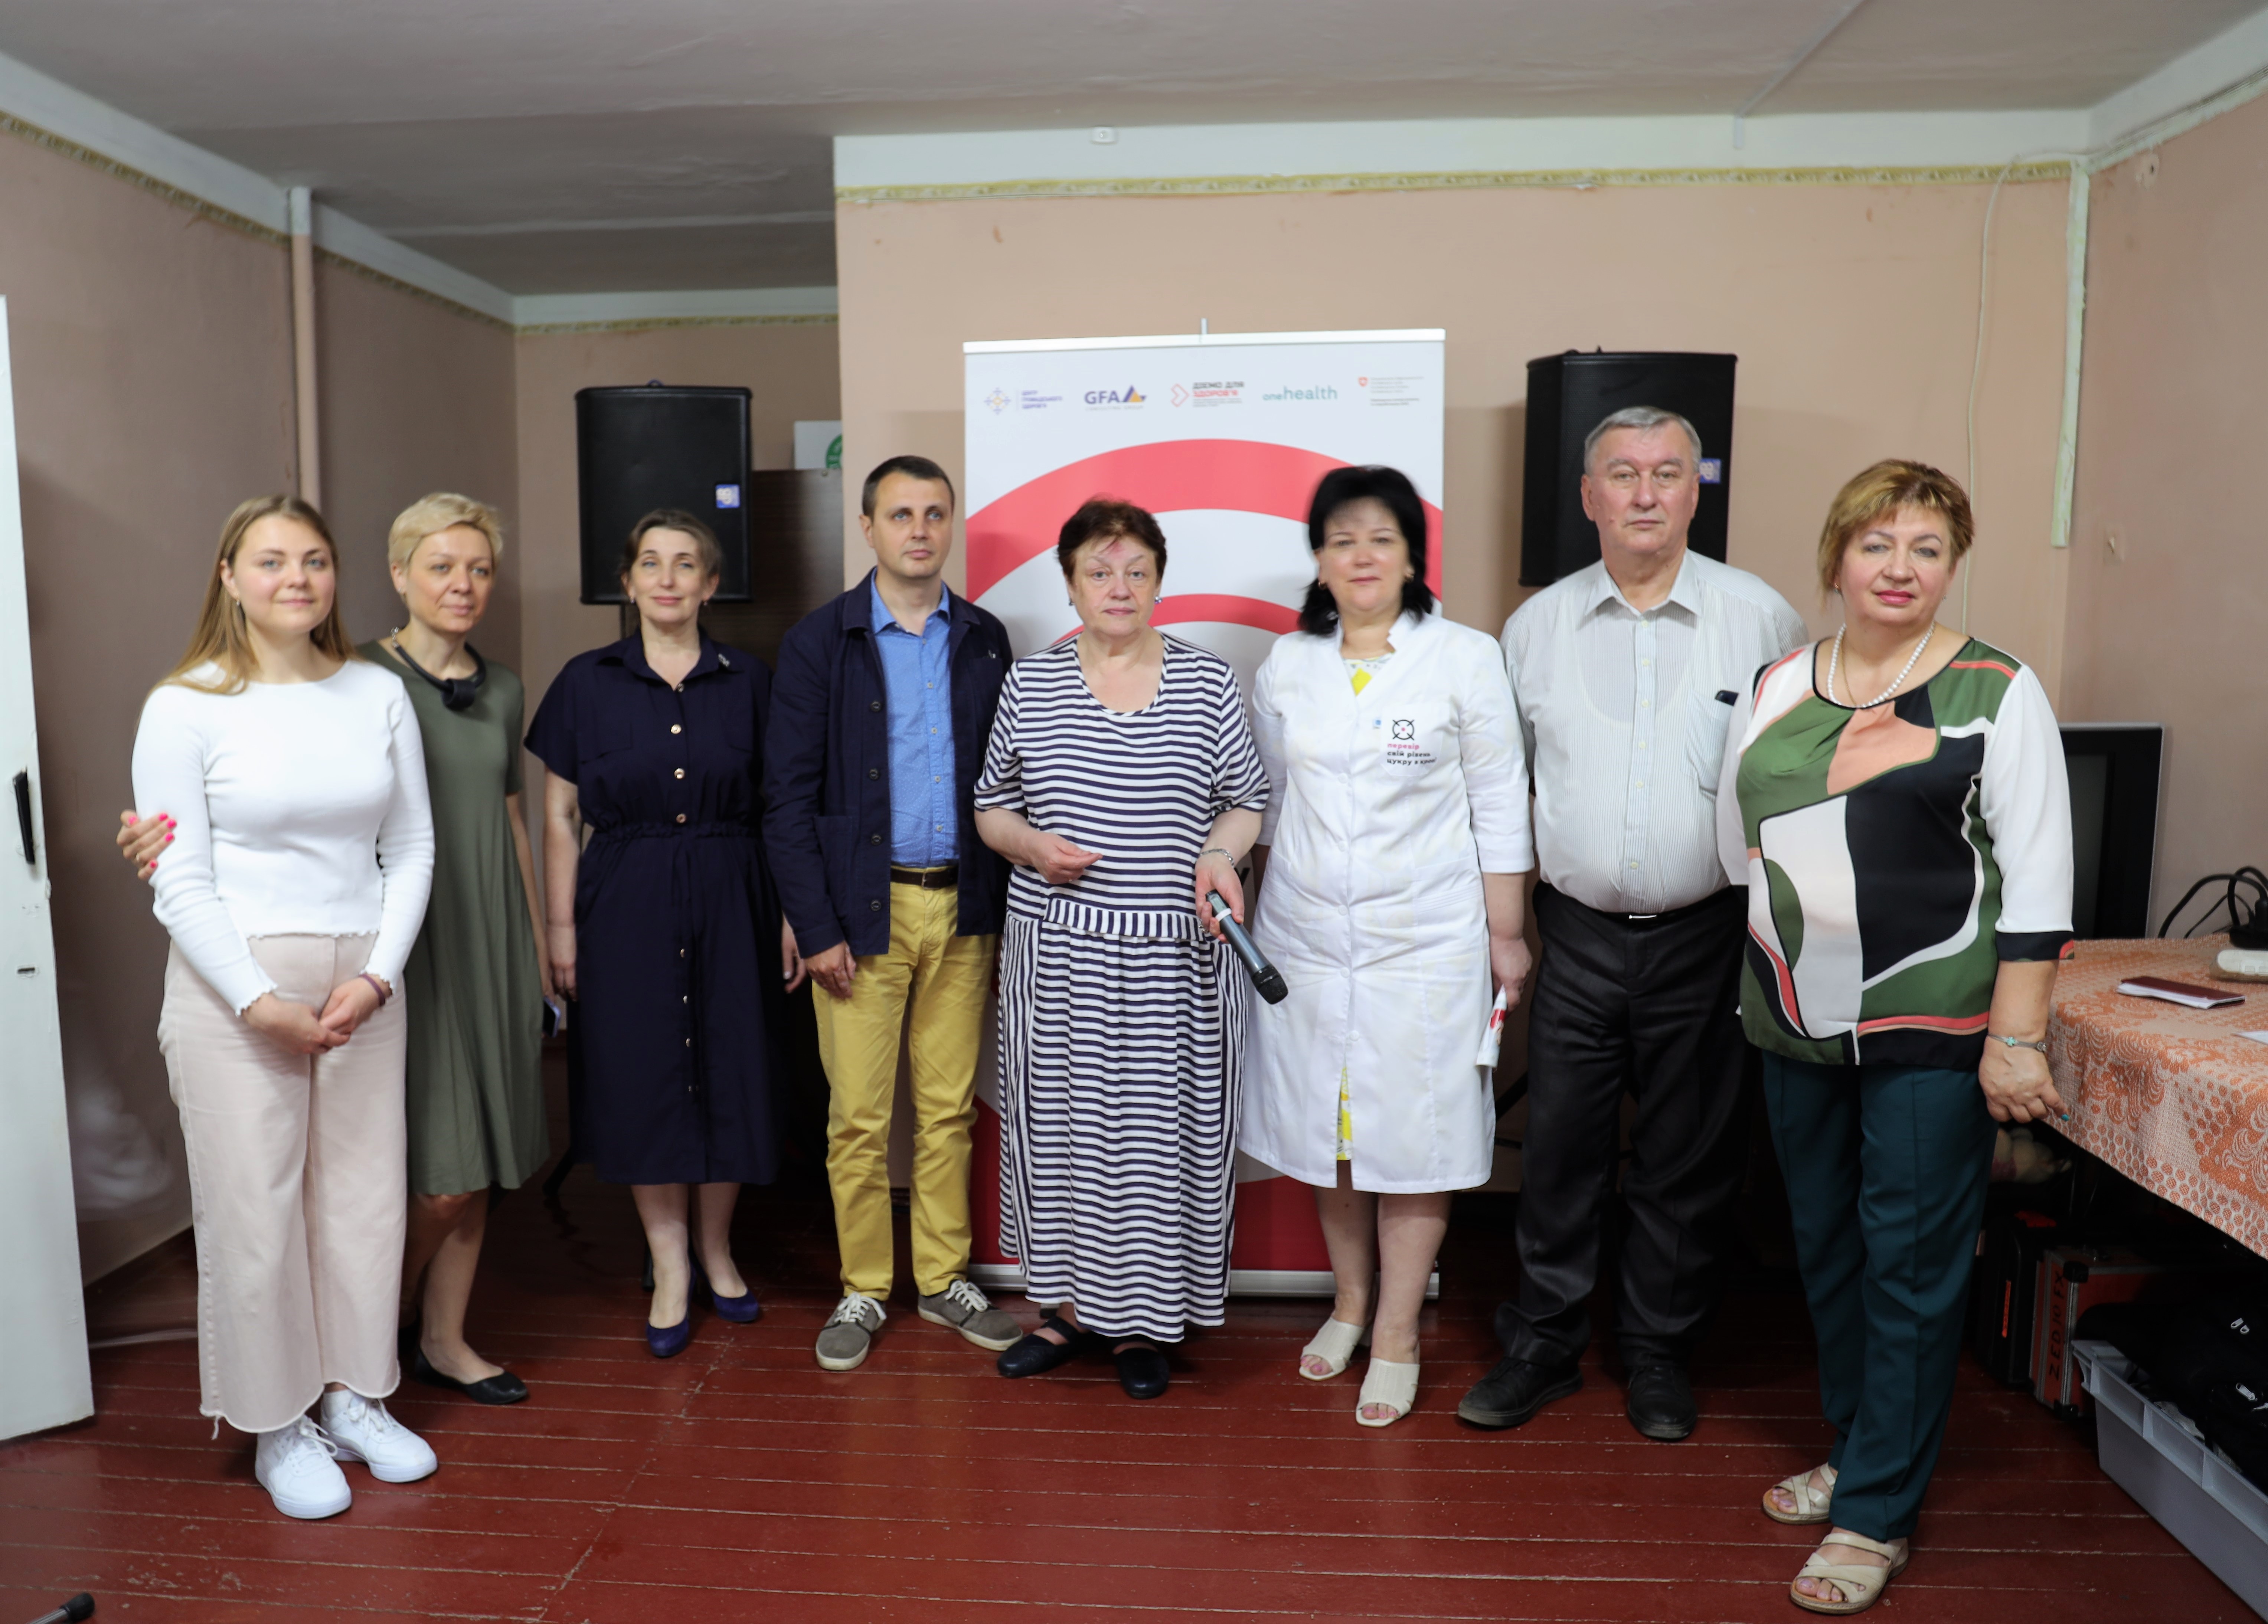 “Acting for health”: at the College of Oil and Gas of the Poltava Polytechnic, more than 150 citizens test the blood sugar content